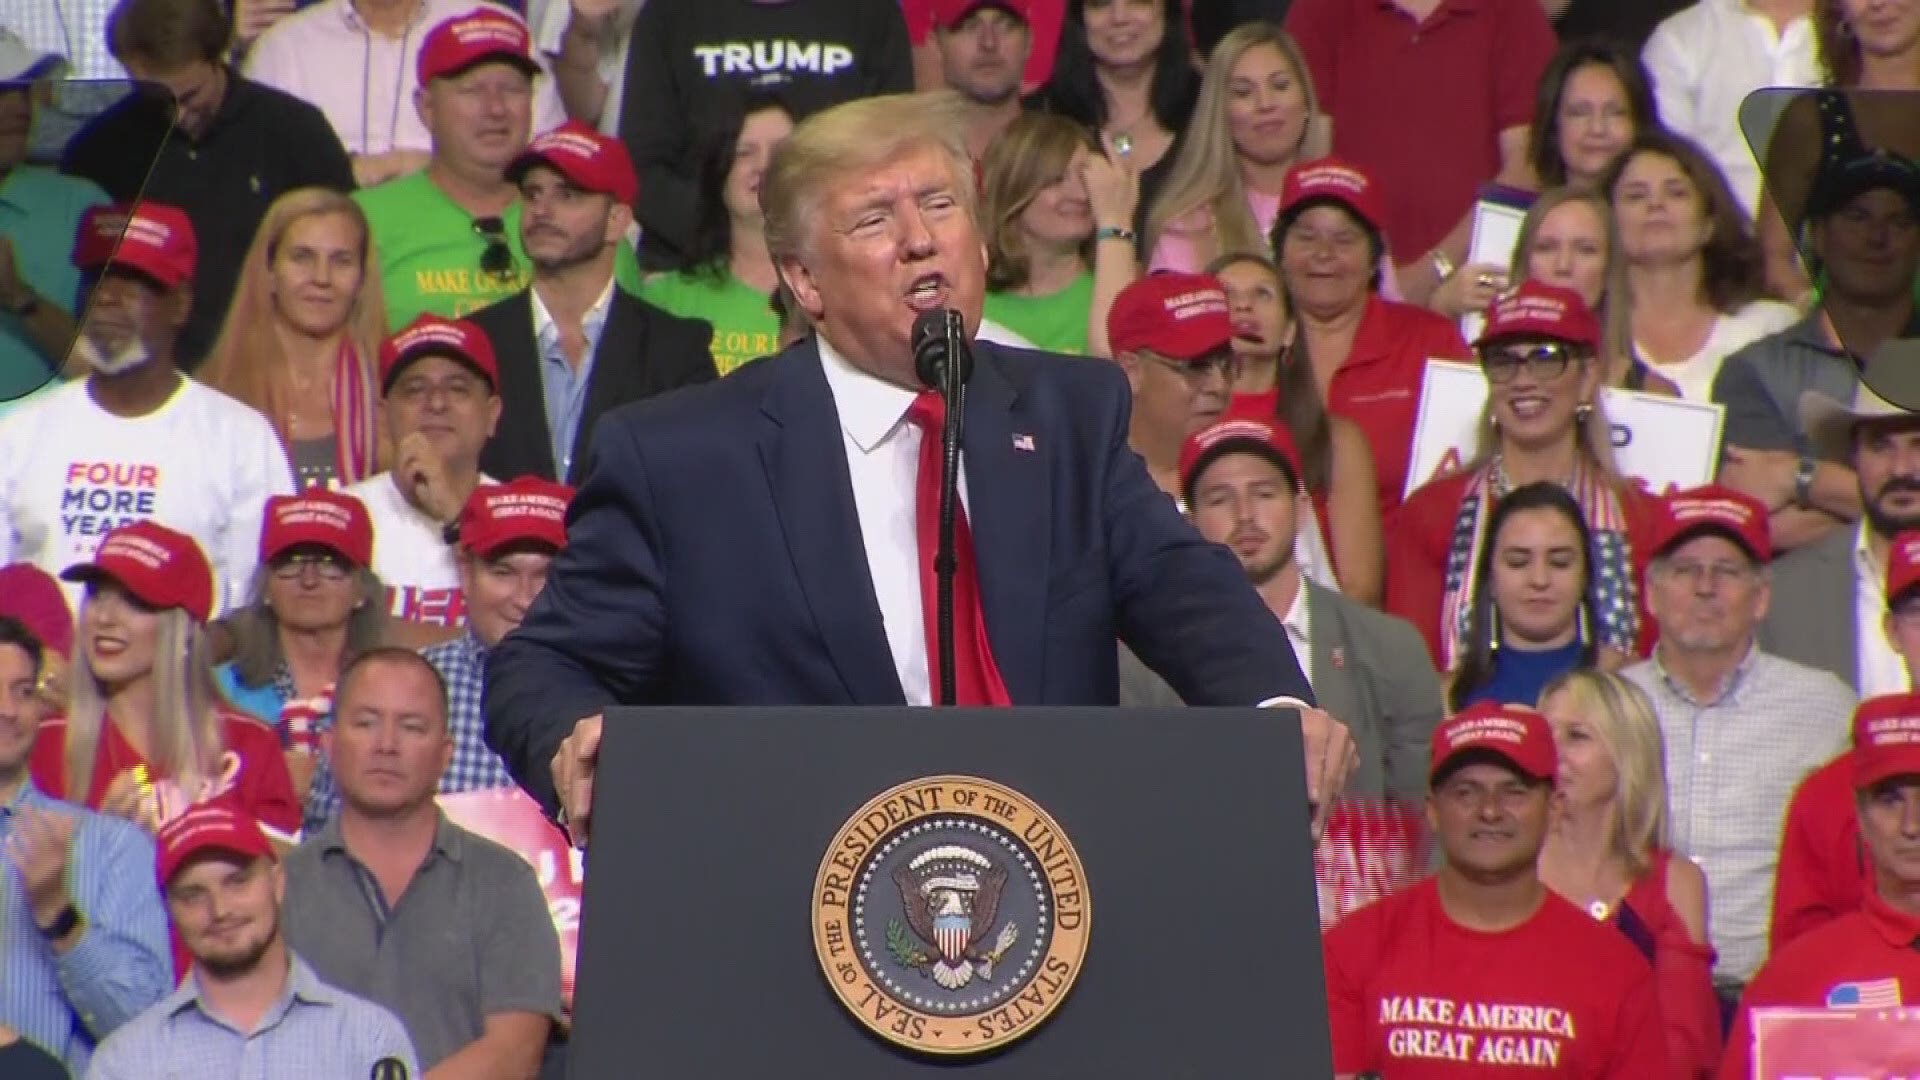 President Donald Trump is officially kicking off his 2020 reelection campaign with a rally at the Amway Center in Orlando today.

Refresh this page for the latest updates from the rally.